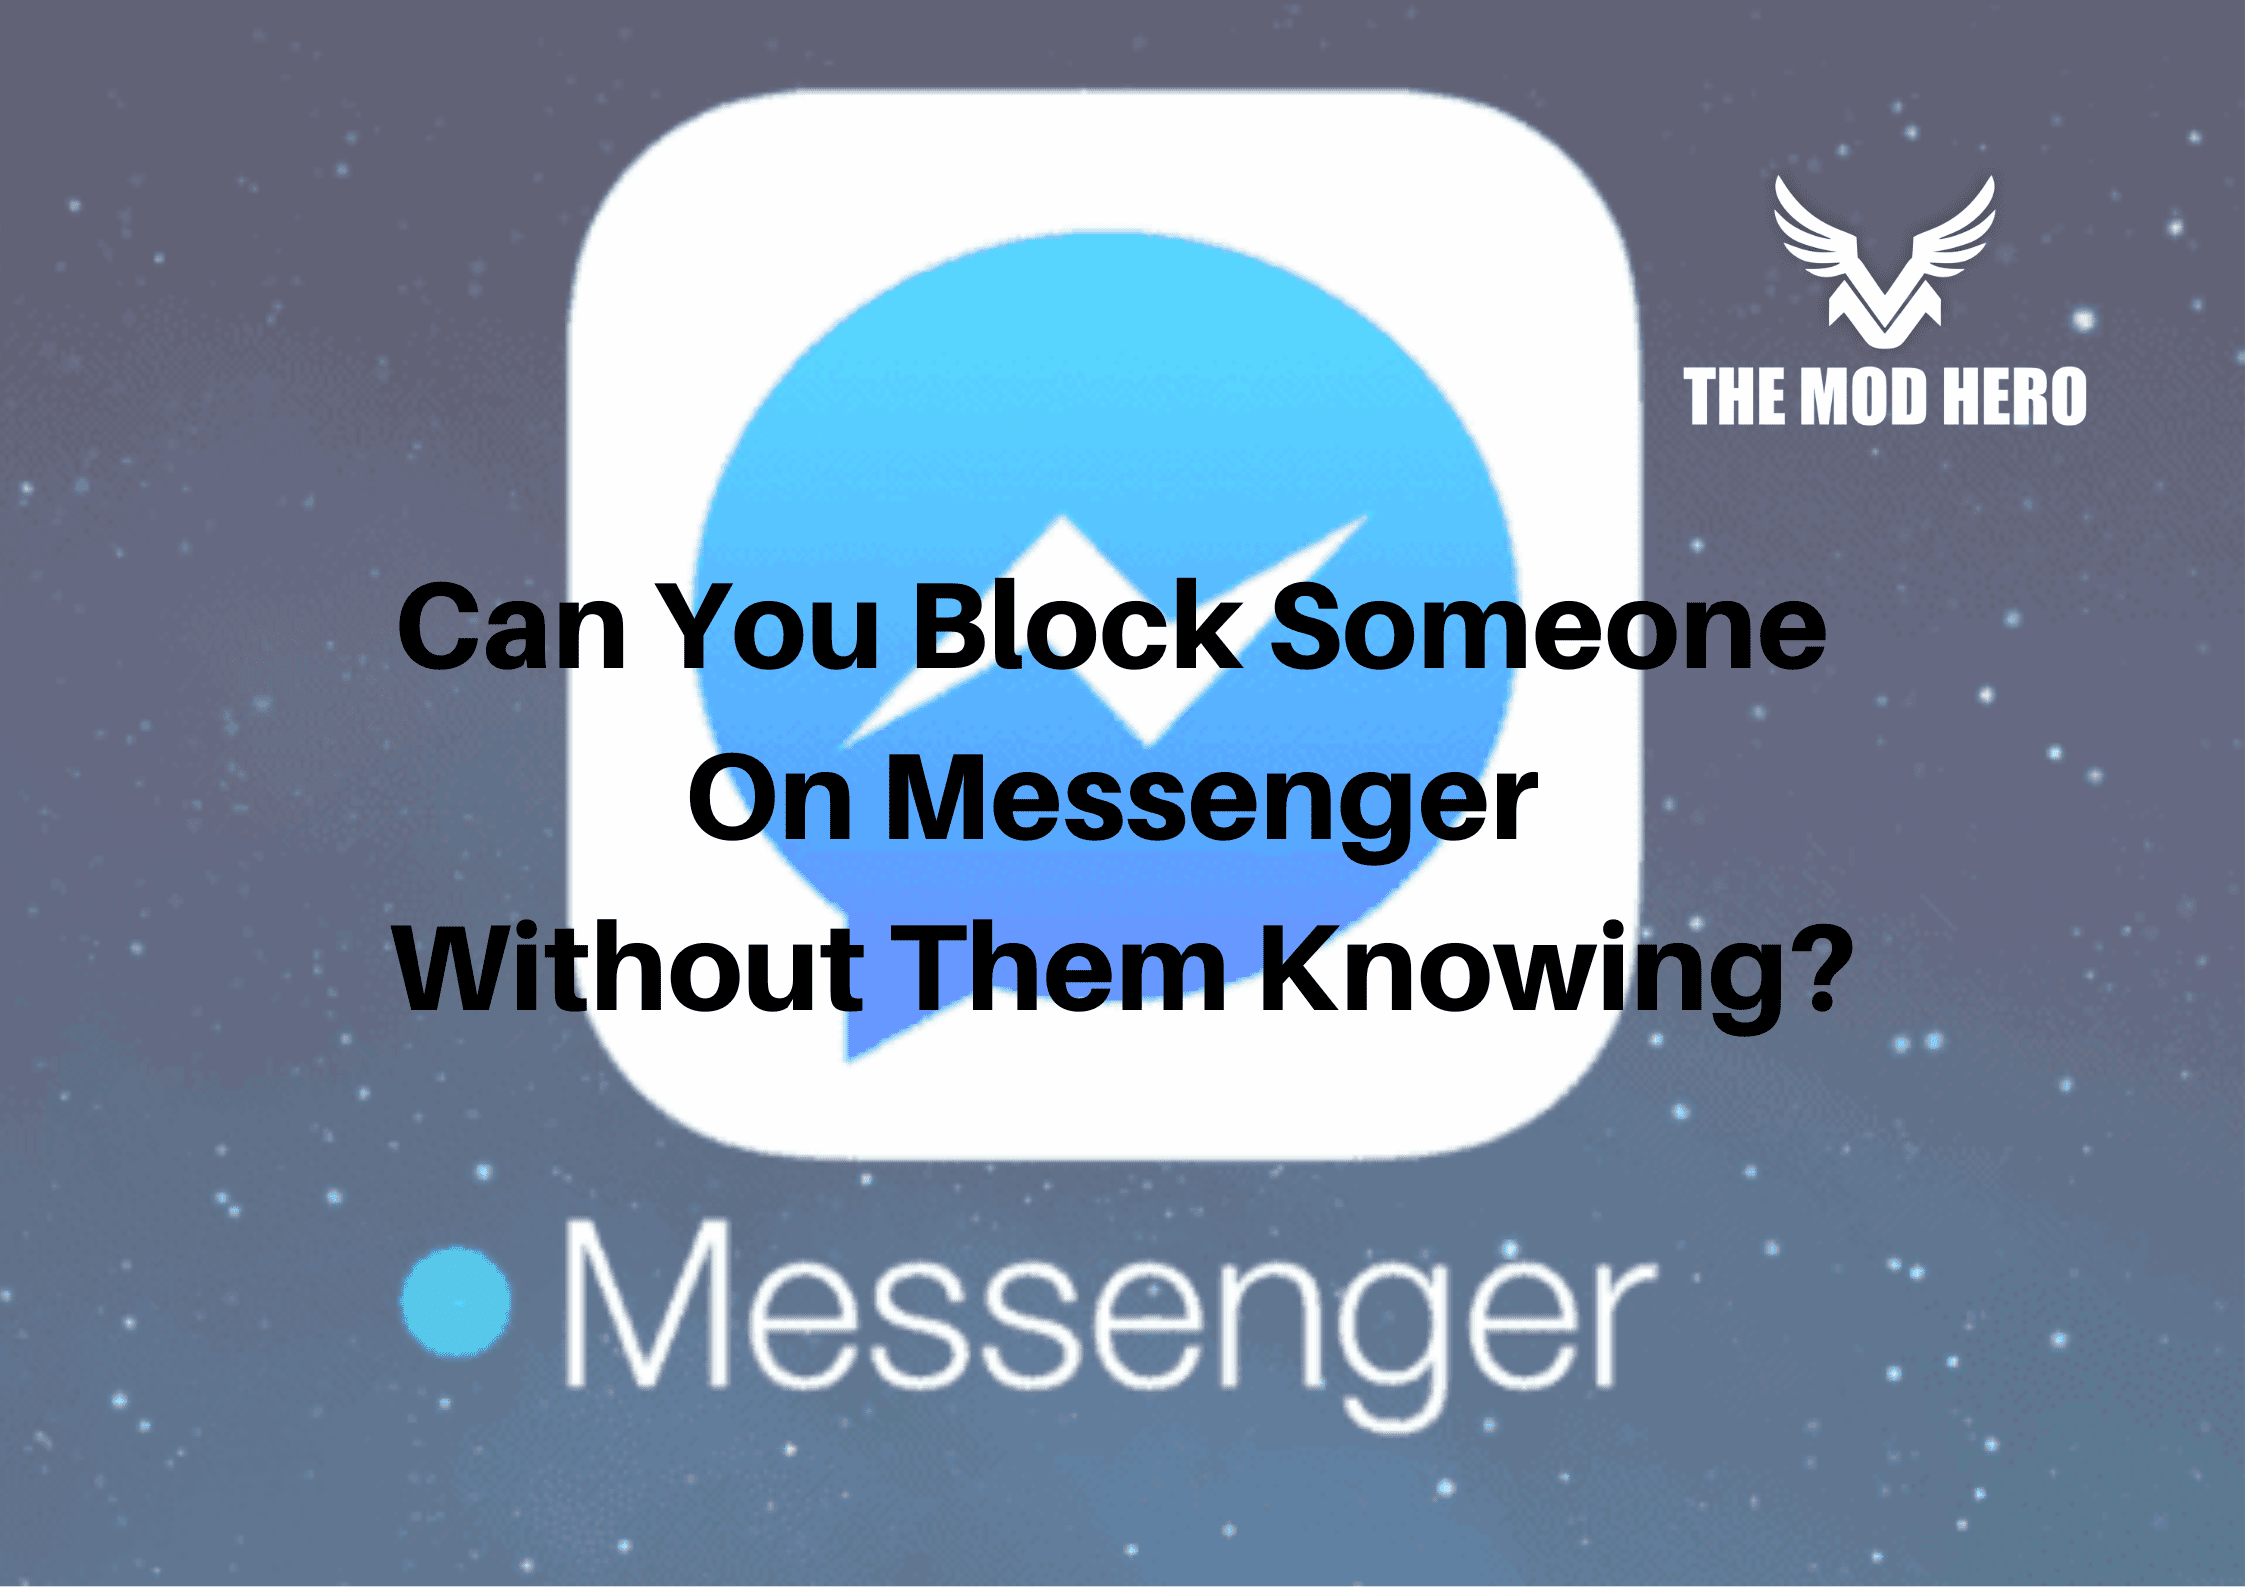 Can You Block Someone On Messenger Without Them Knowing